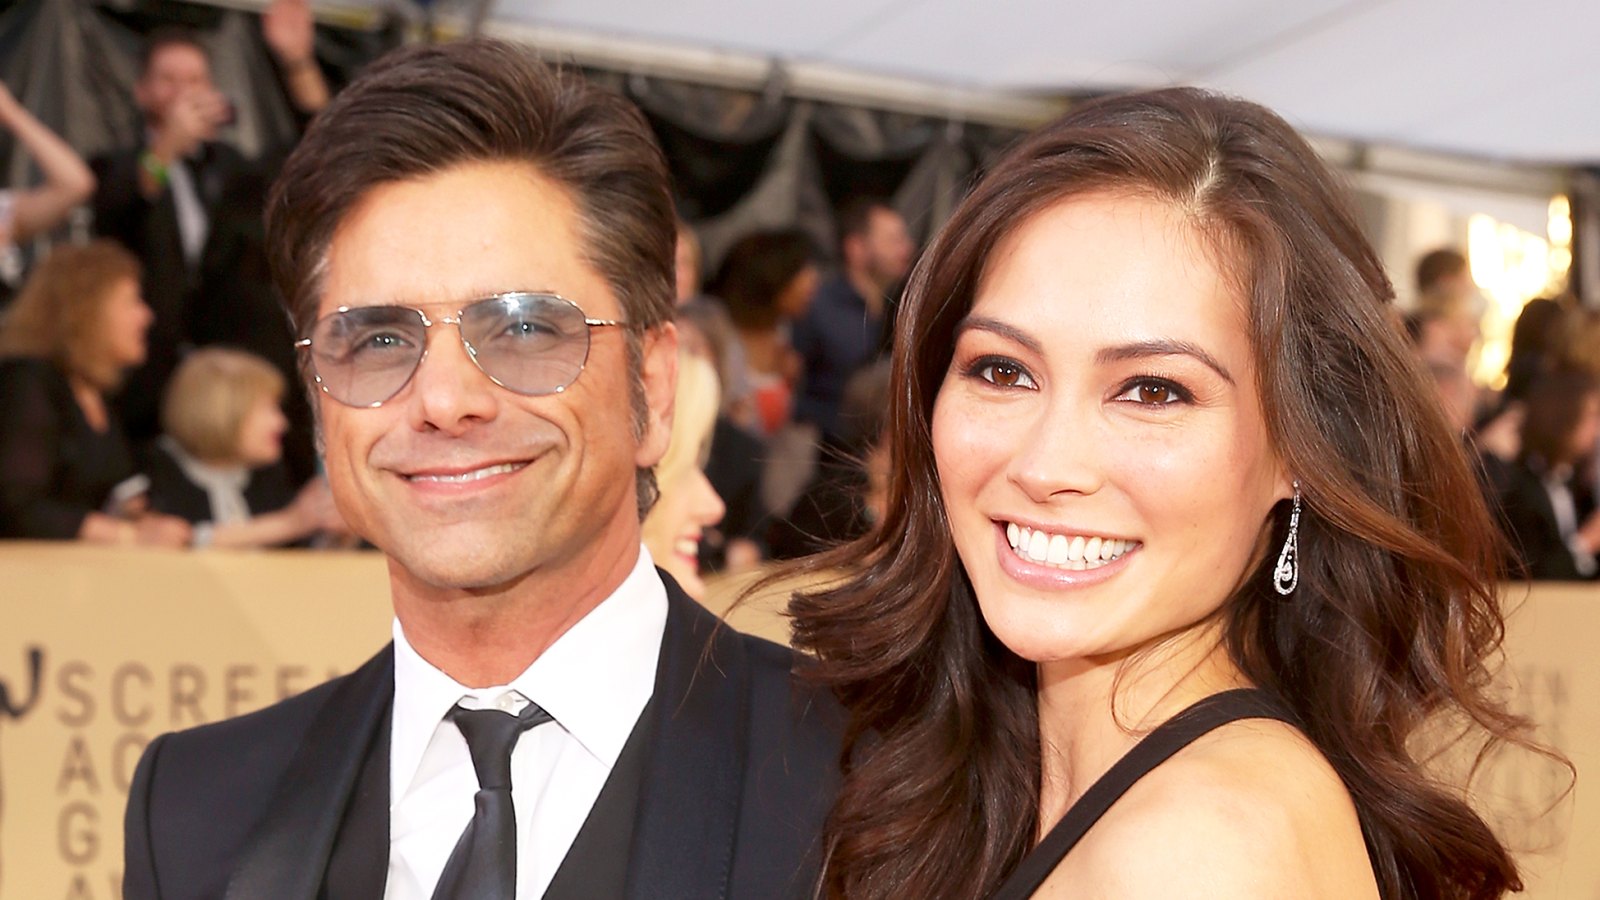 John Stamos and Caitlin McHugh attend the 24th Annual Screen Actors Guild Awards at The Shrine Auditorium in Los Angeles, California.